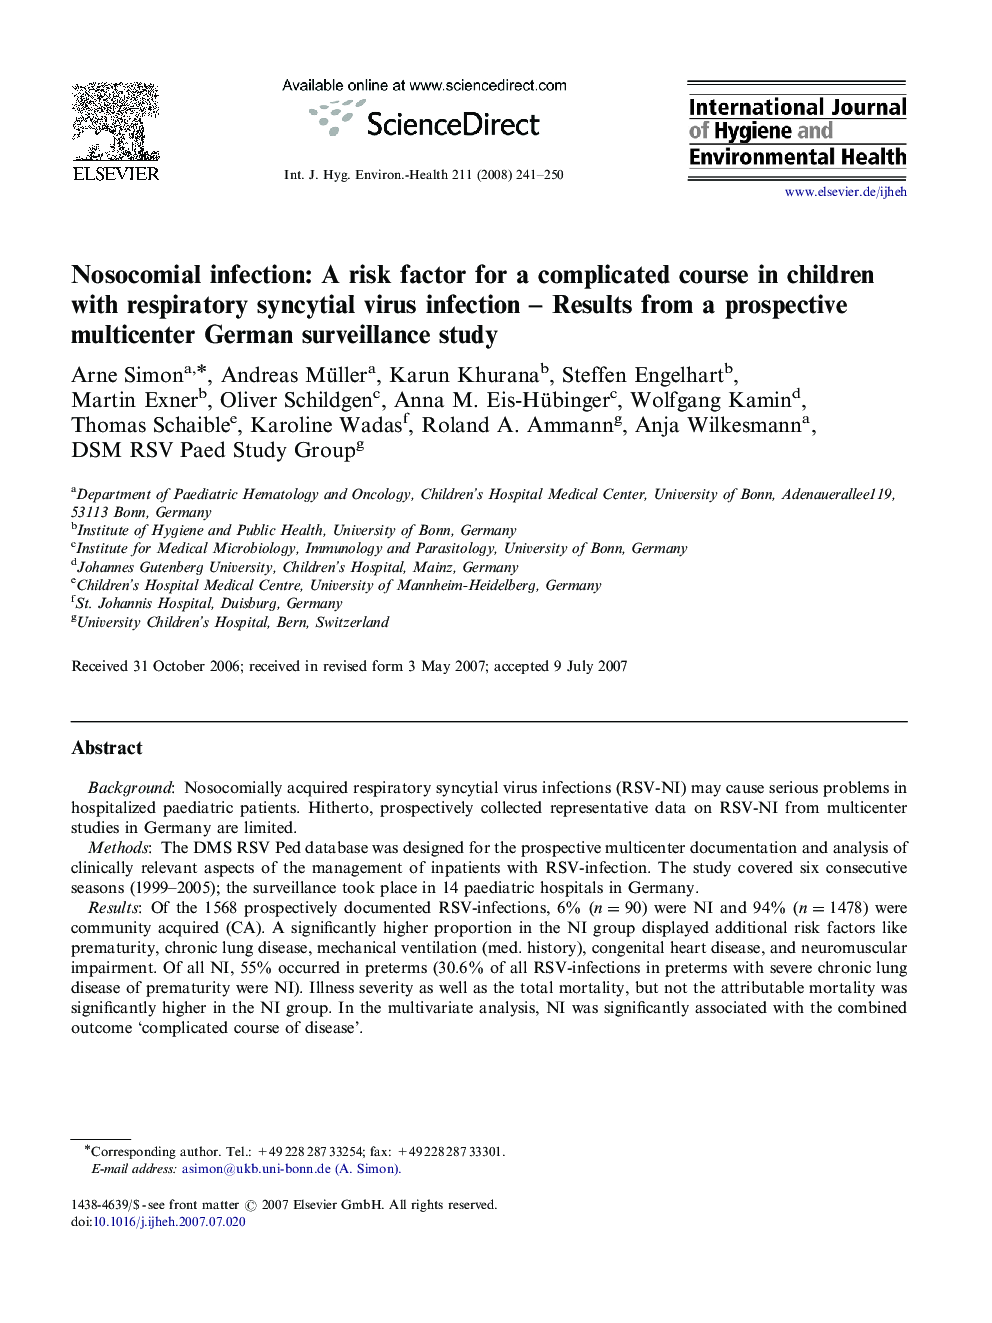 Nosocomial infection: A risk factor for a complicated course in children with respiratory syncytial virus infection – Results from a prospective multicenter German surveillance study